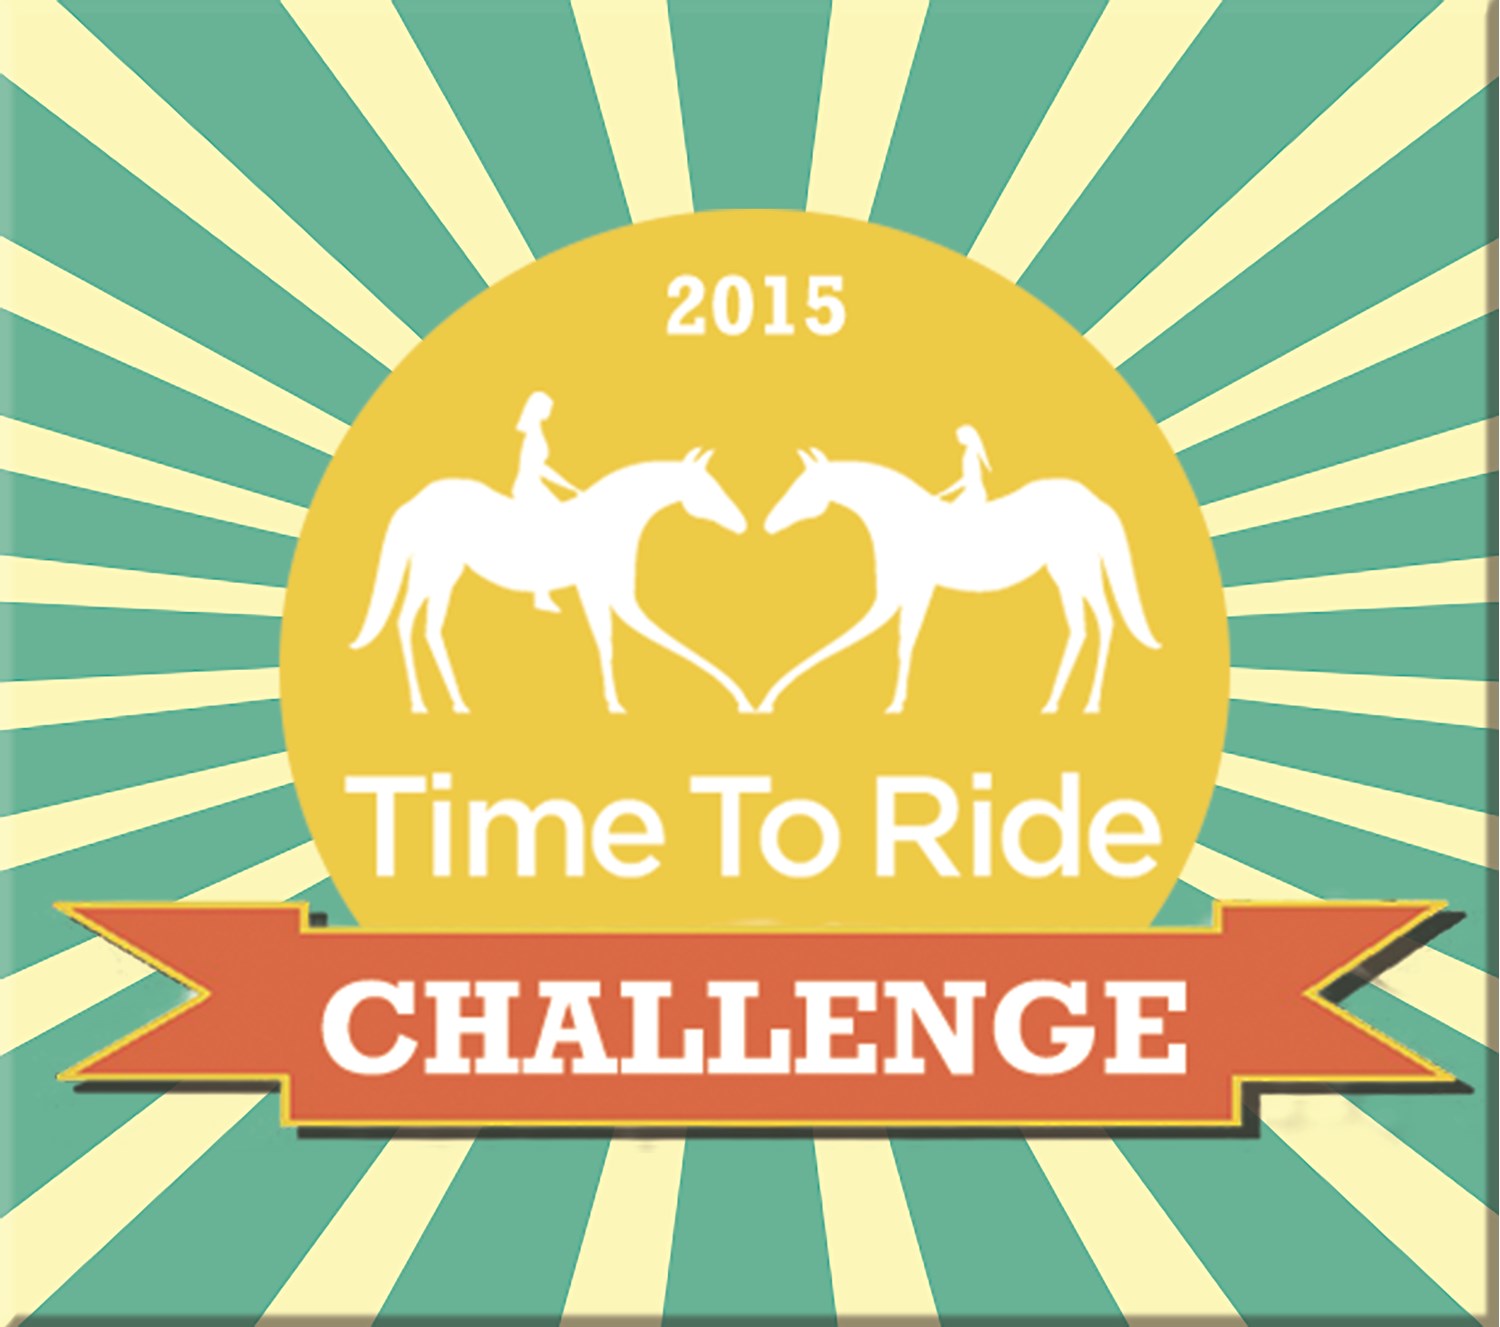 Time to Ride Challenge Returns in 2015 with $100,000 Cash and Prizes